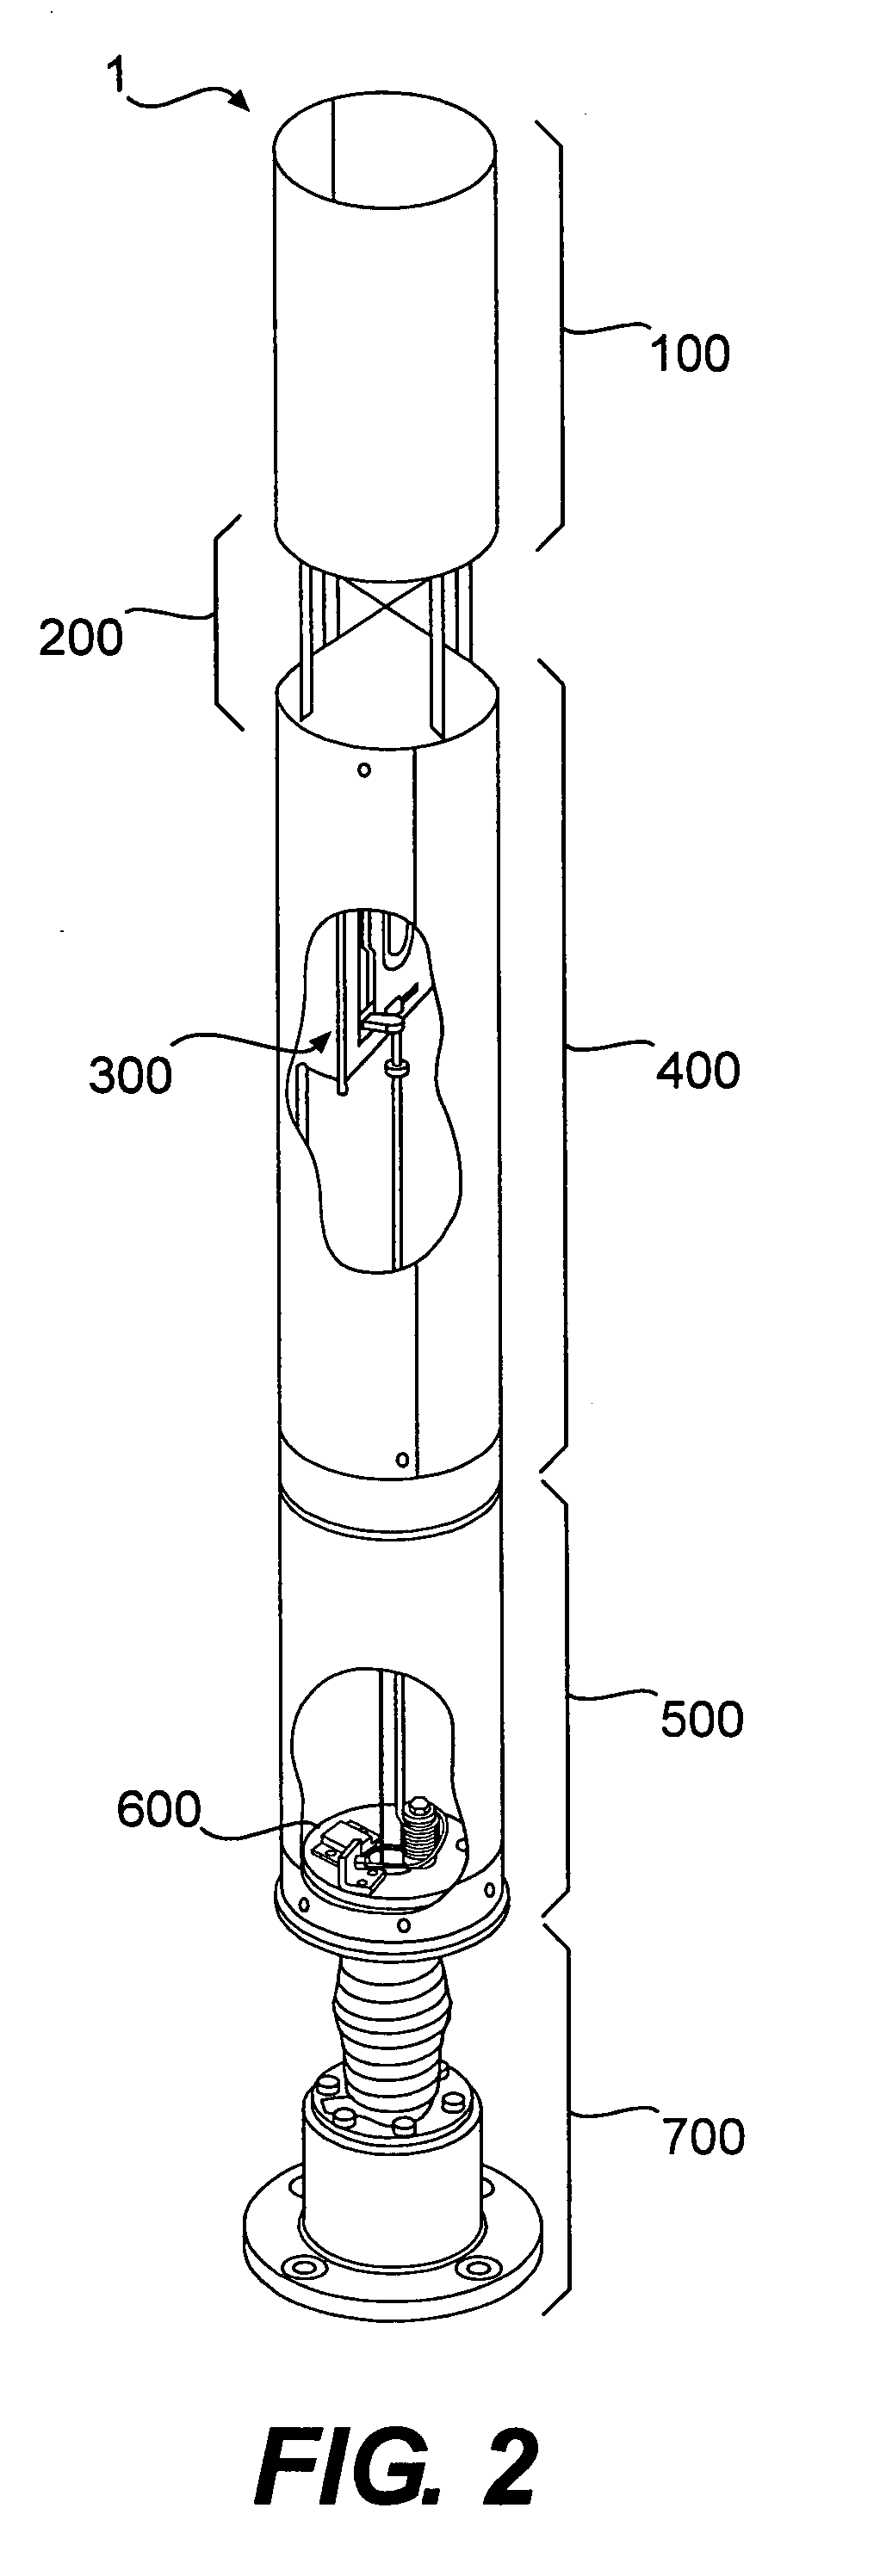 Ultra-broadband antenna system combining an asymmetrical dipole and a biconical dipole to form a monopole